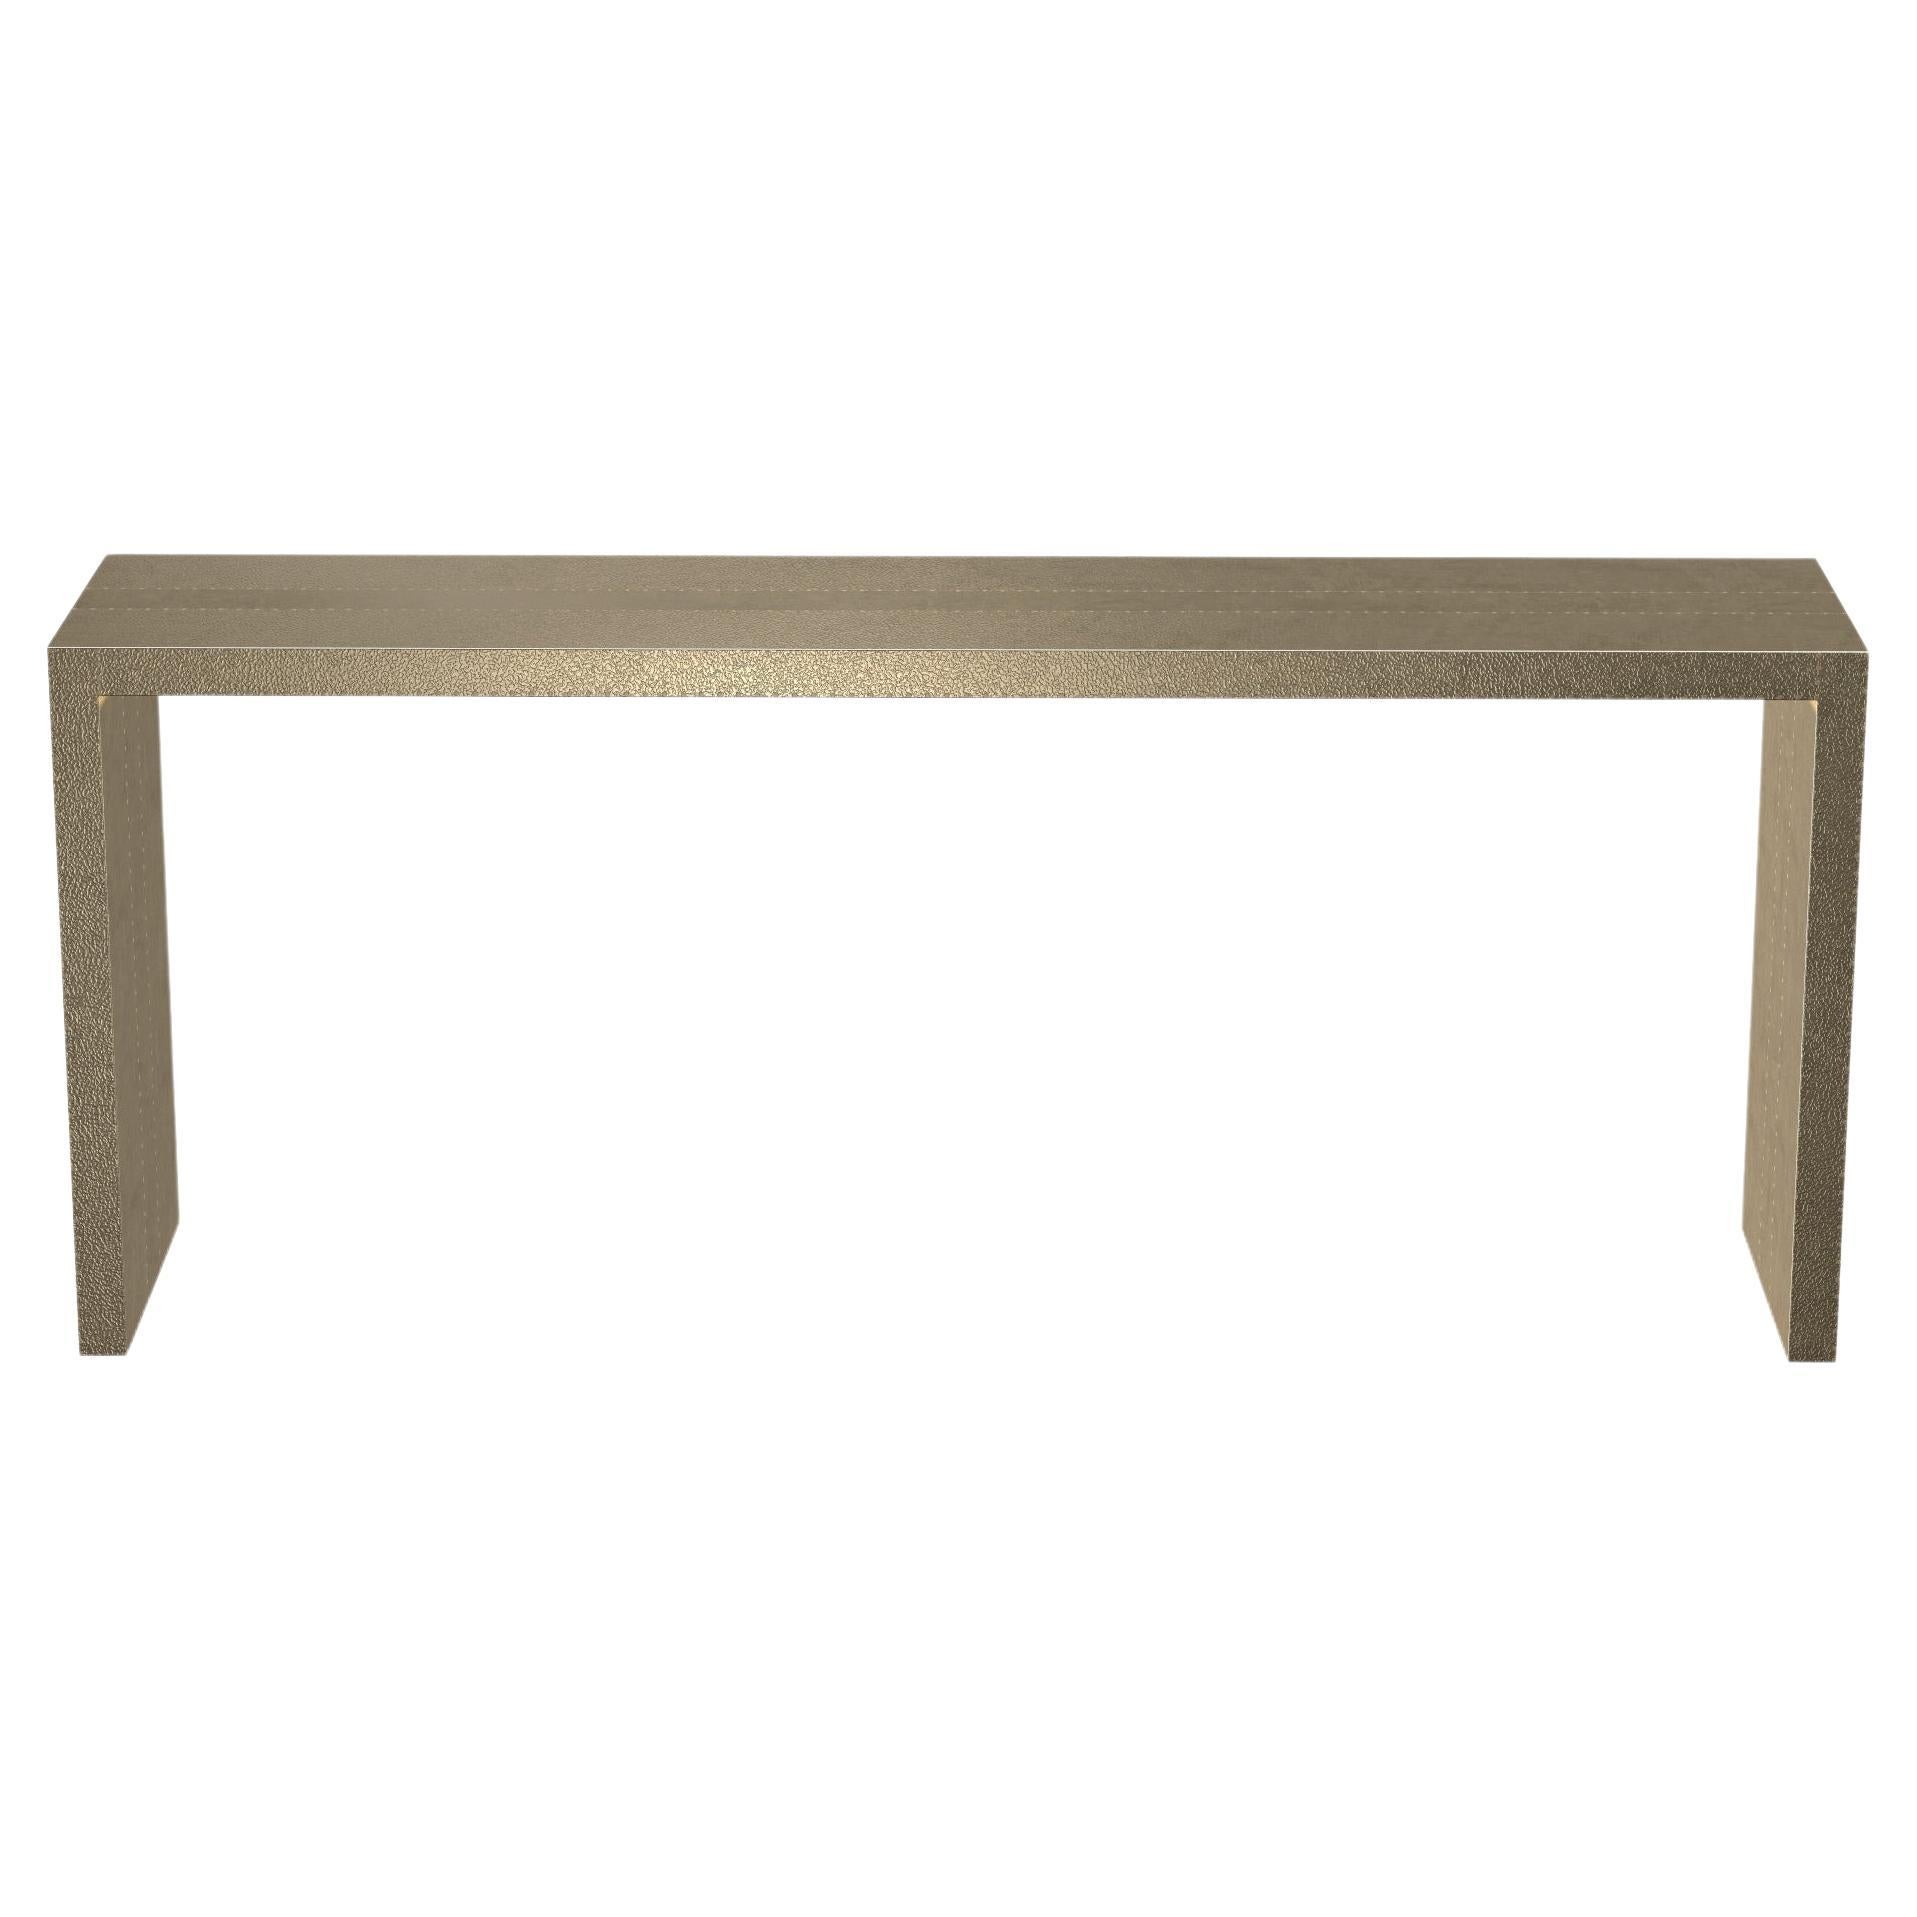 Art Deco Game Console Tables in Copper Fine Hammered by Alison Spear